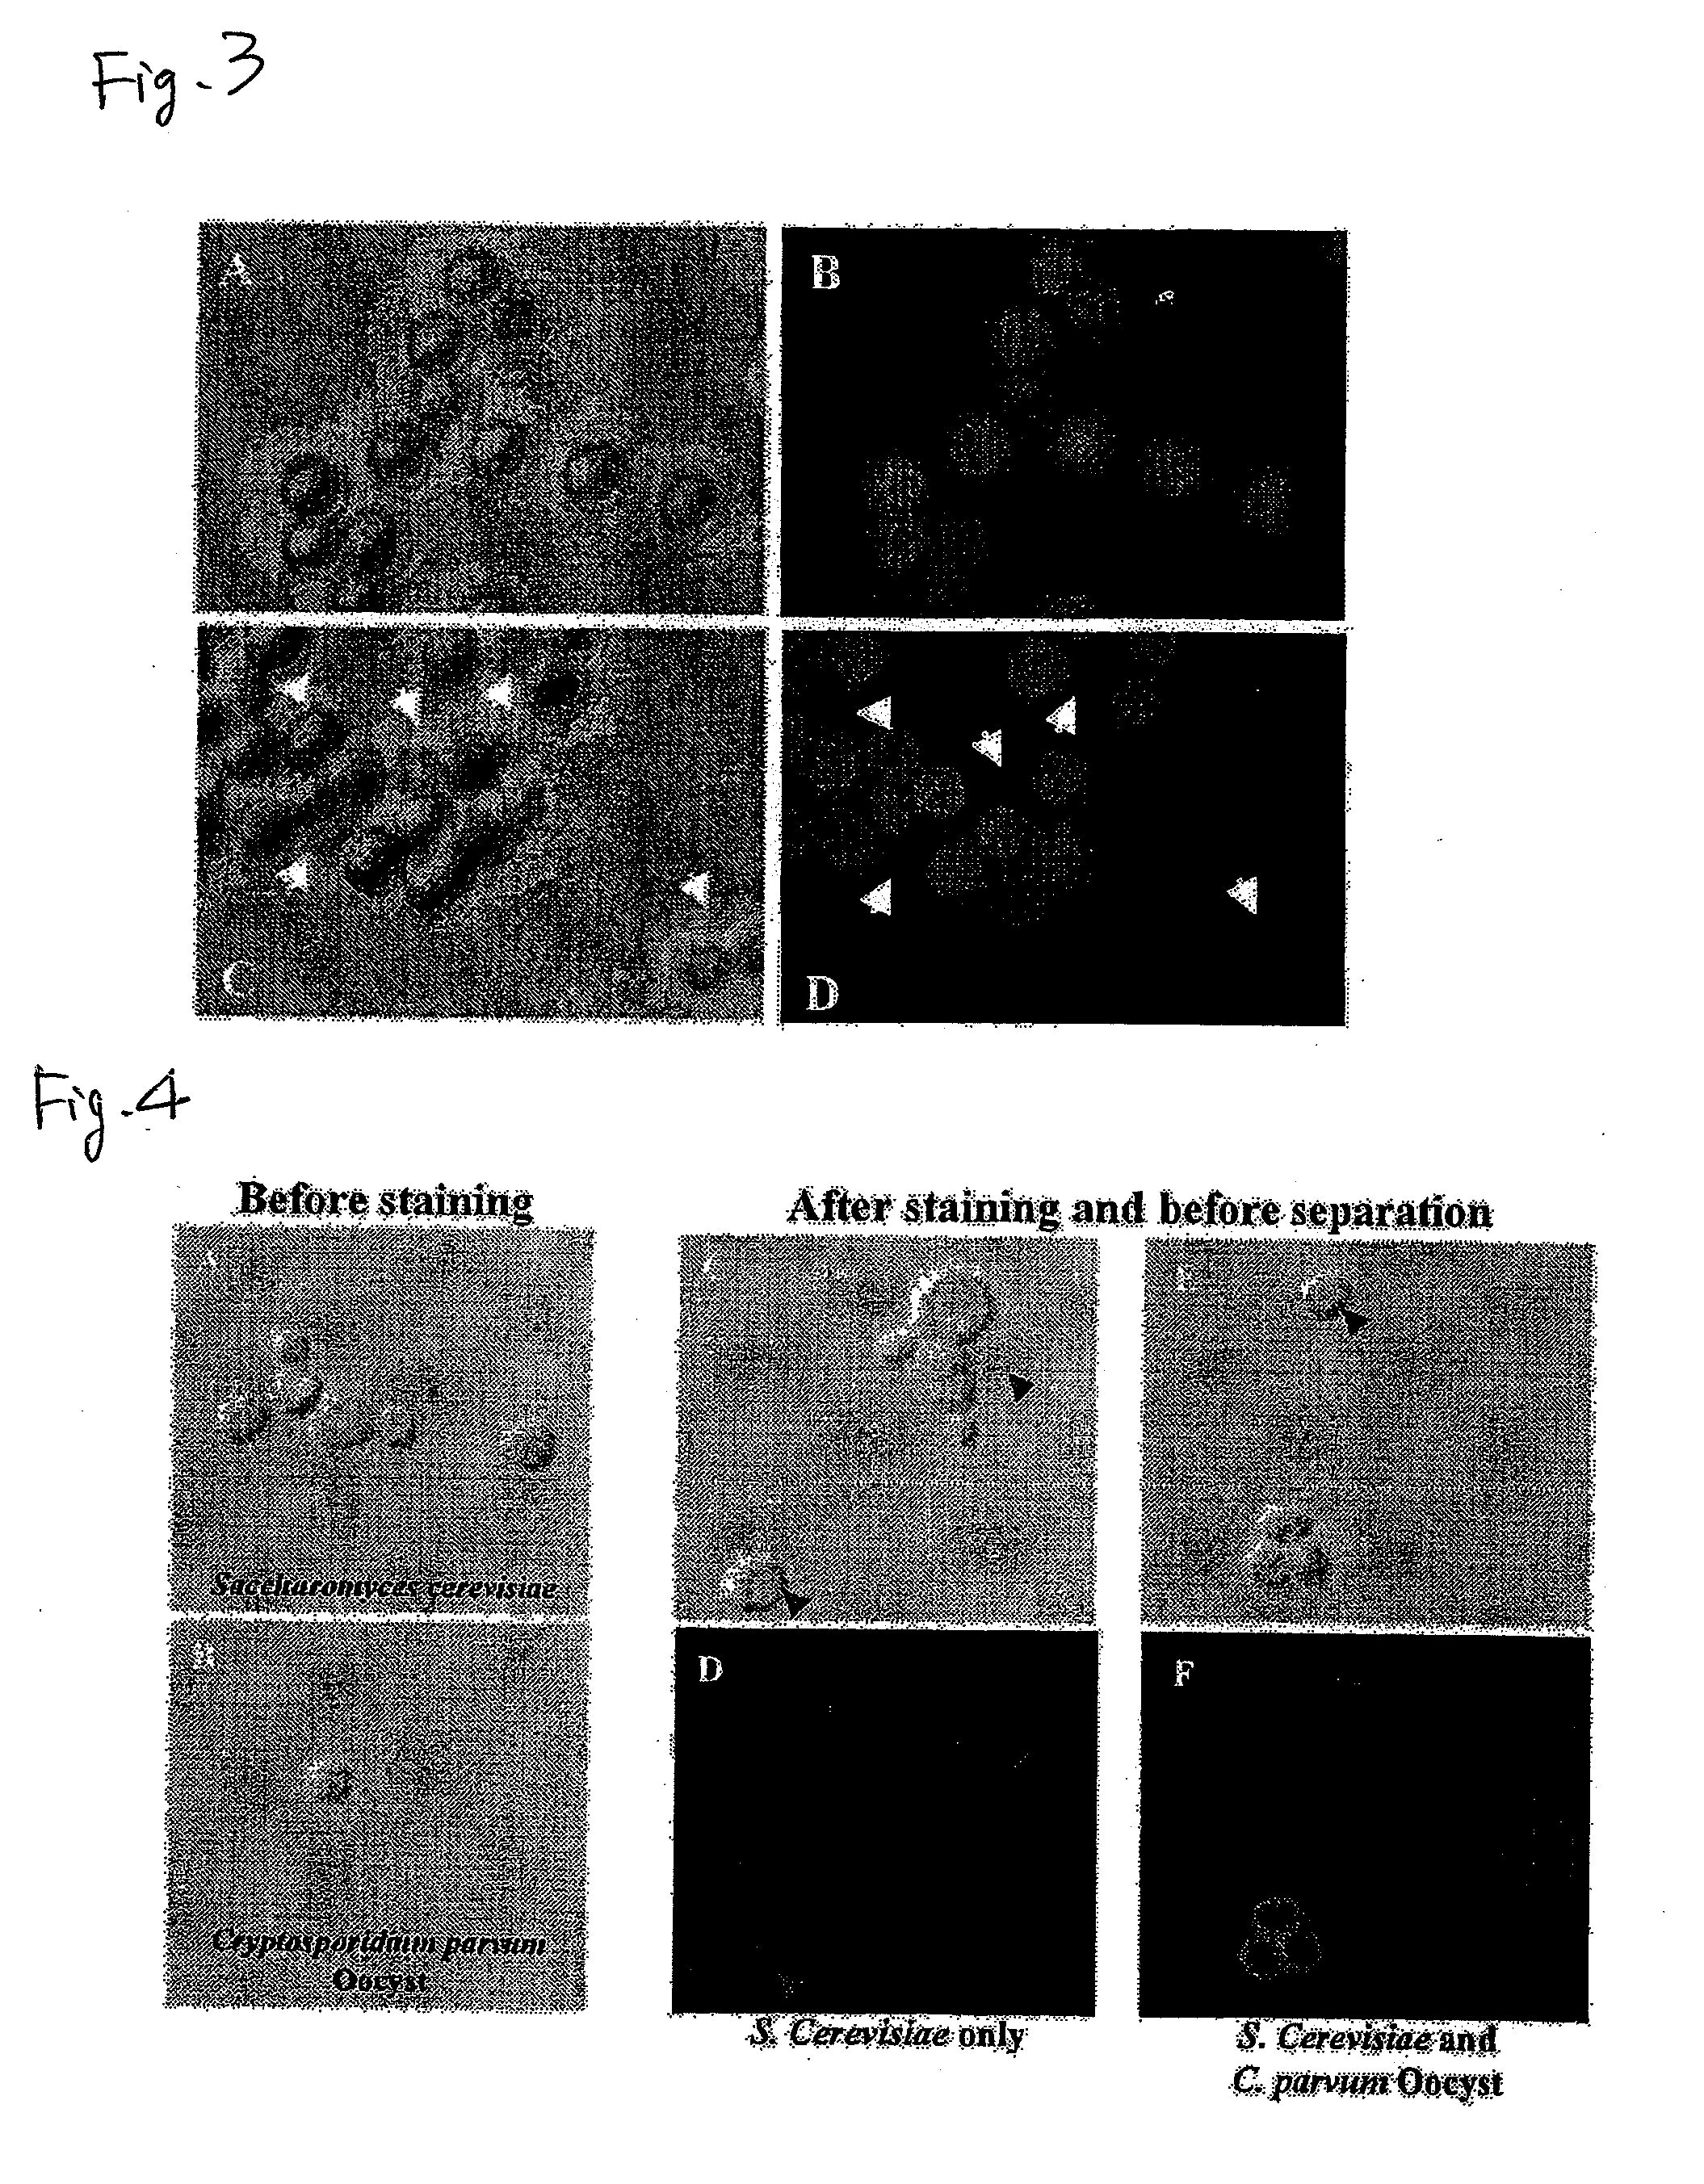 Method For Measuring Protozoan Oocyst and Detecting Reagent